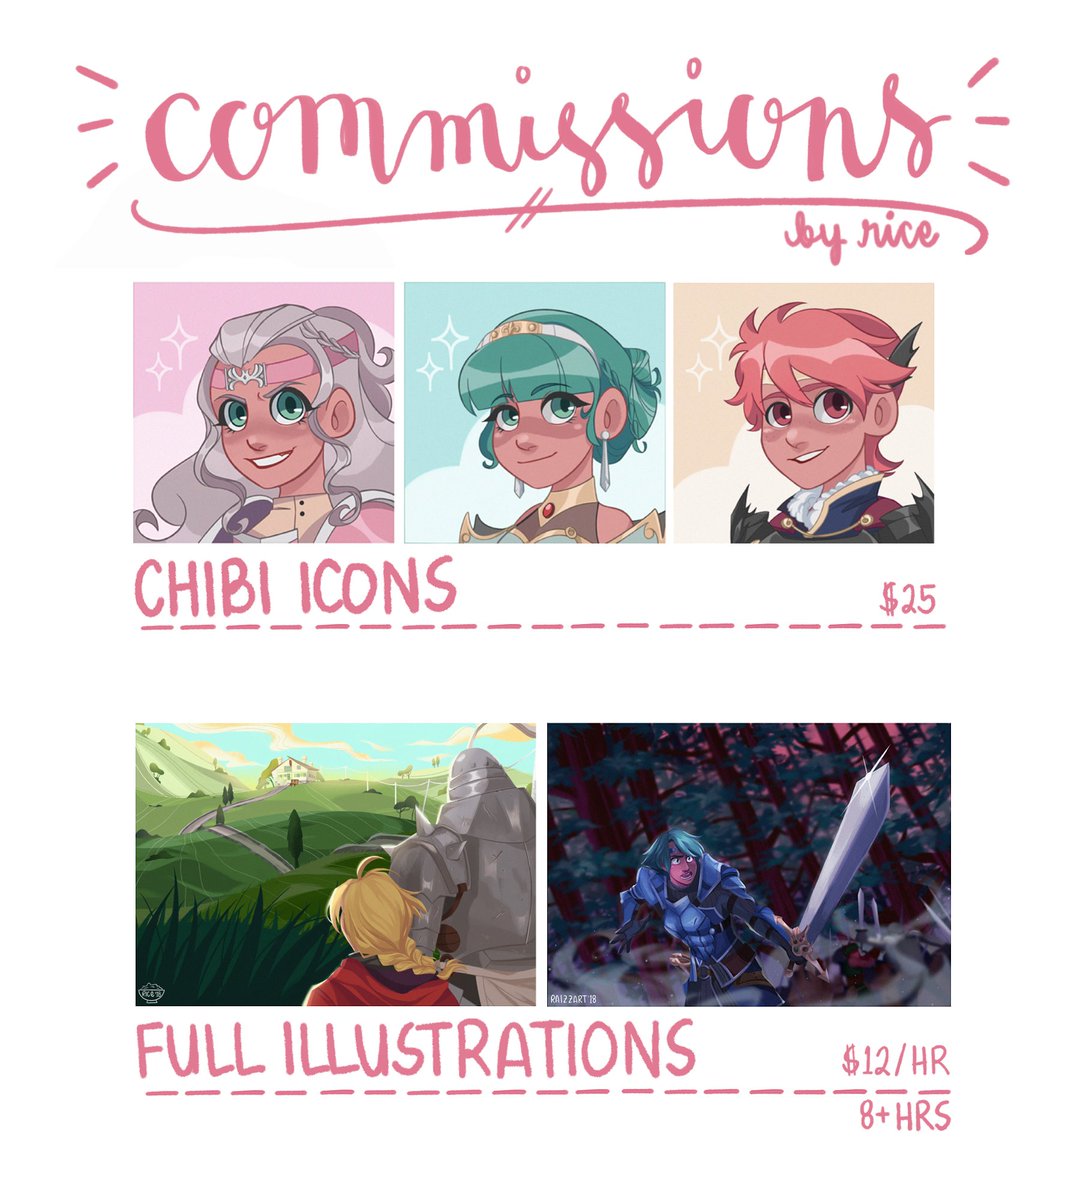 [RTs ?] hello! i'm taking commissions to help pay for some art school expenses. 5 slots, dm me if interested! you can check out @raizzart for more examples. thank you!!! 